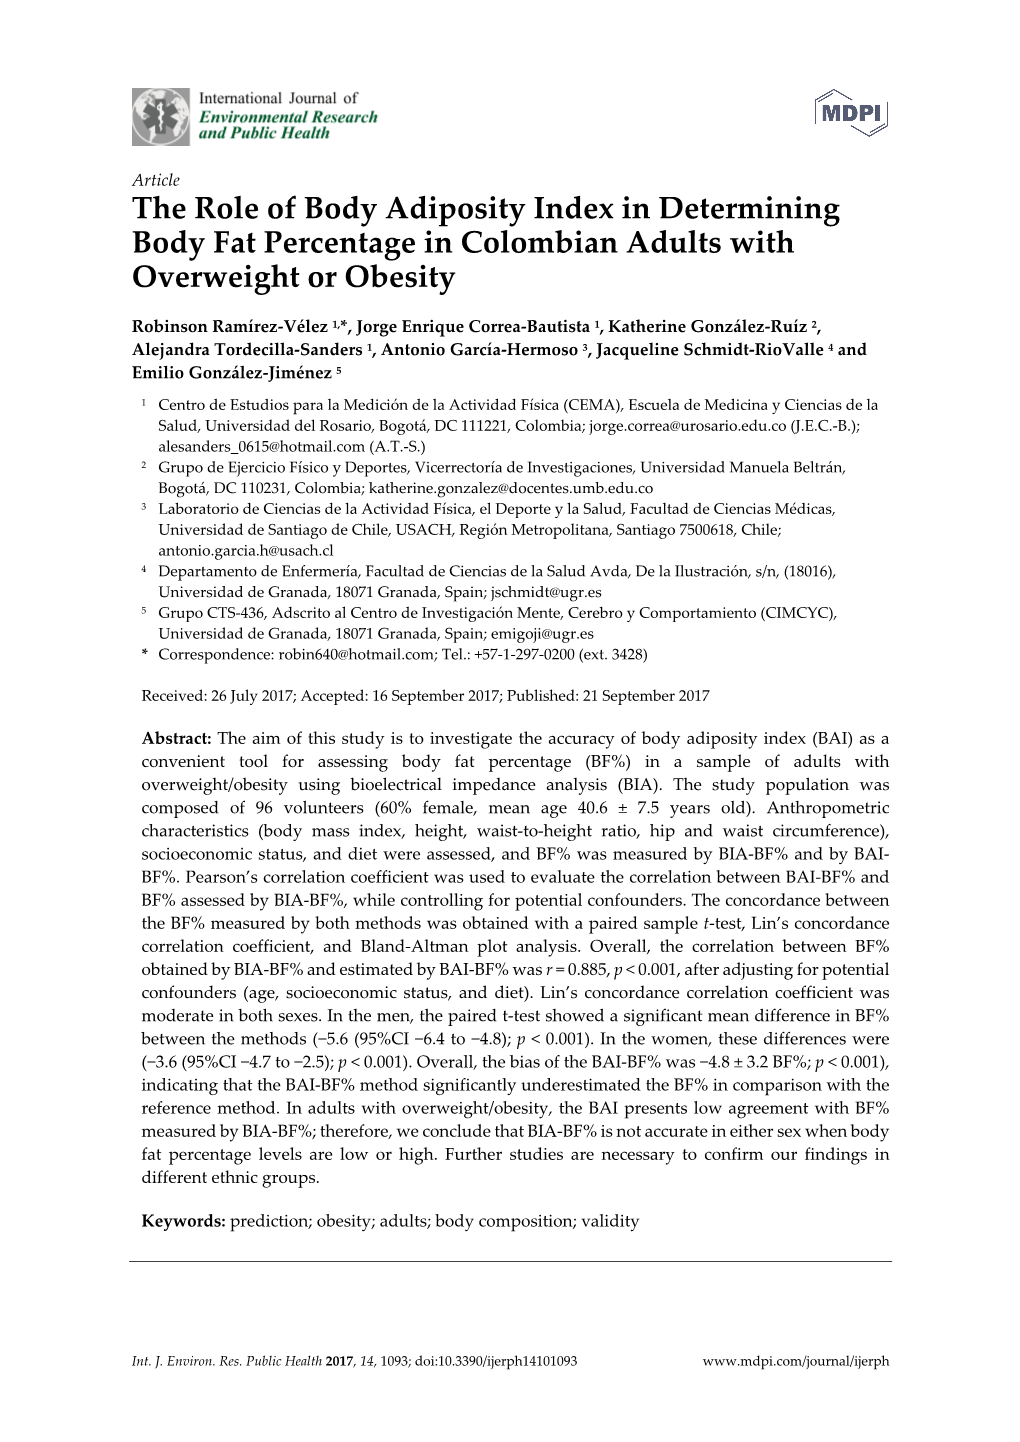 The Role of Body Adiposity Index in Determining Body Fat Percentage in Colombian Adults with Overweight Or Obesity